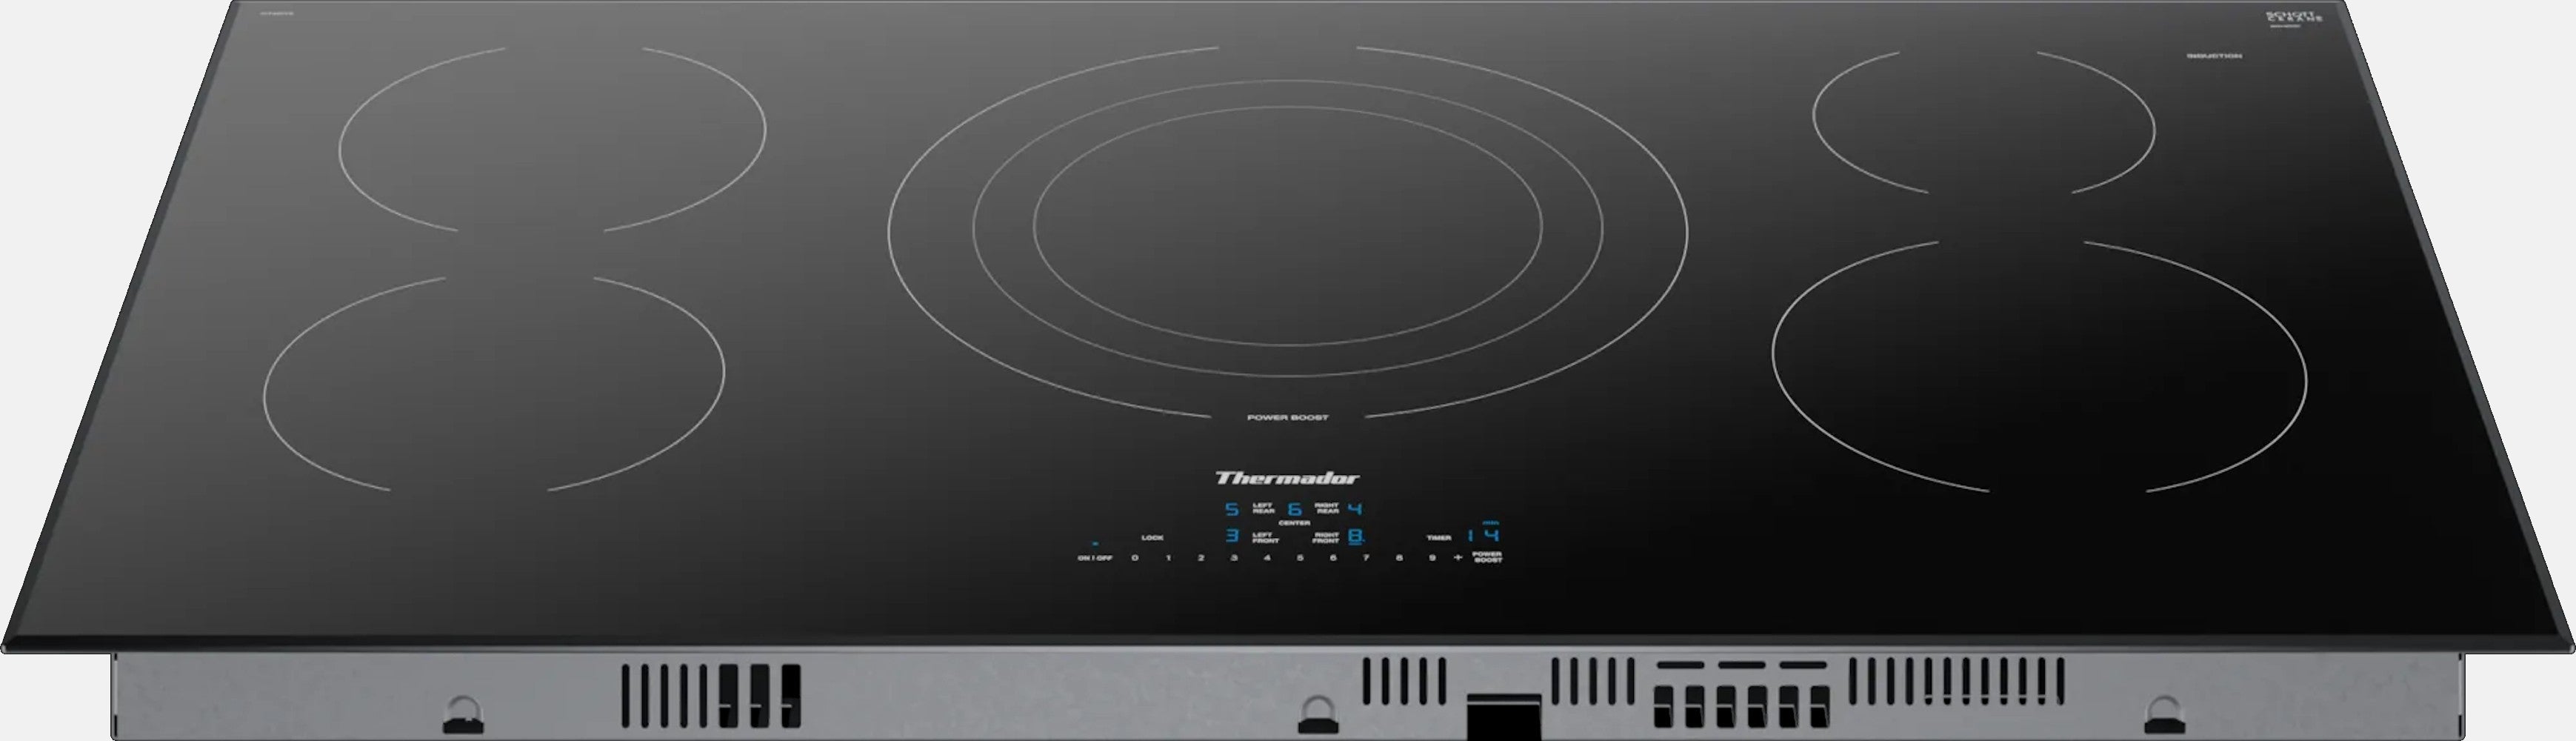 Thermador - 37 Inch Induction Cooktop in Black - CIT365YB